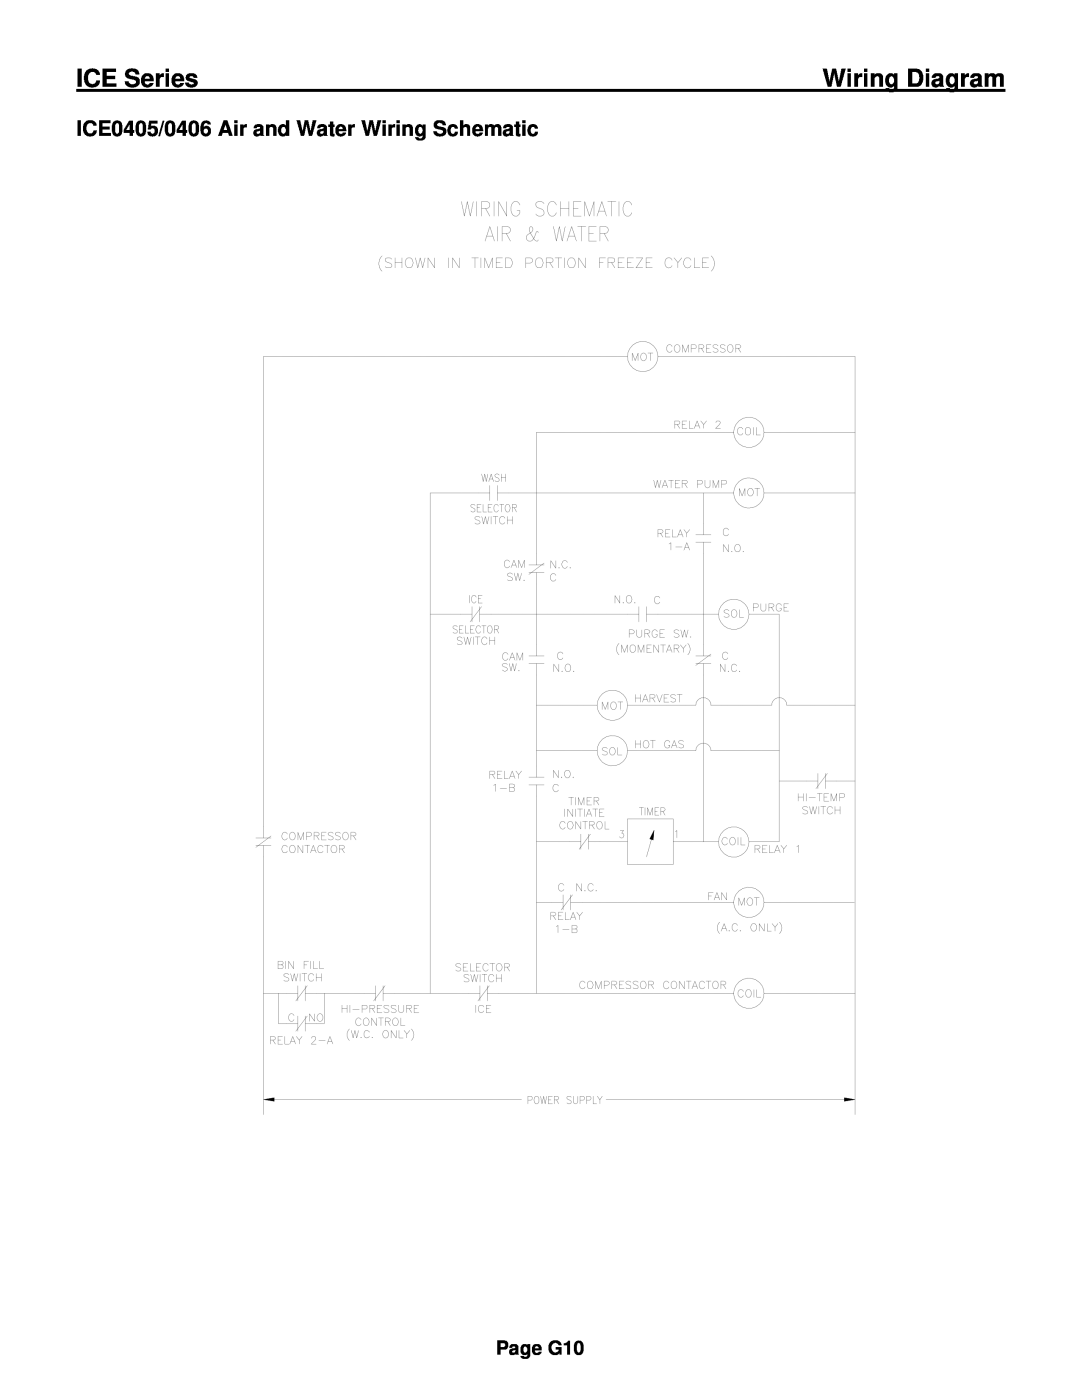 Ice-O-Matic ICE0250 Series ICE0405/0406 Air and Water Wiring Schematic, ICE Series, Wiring Diagram, Page G10 